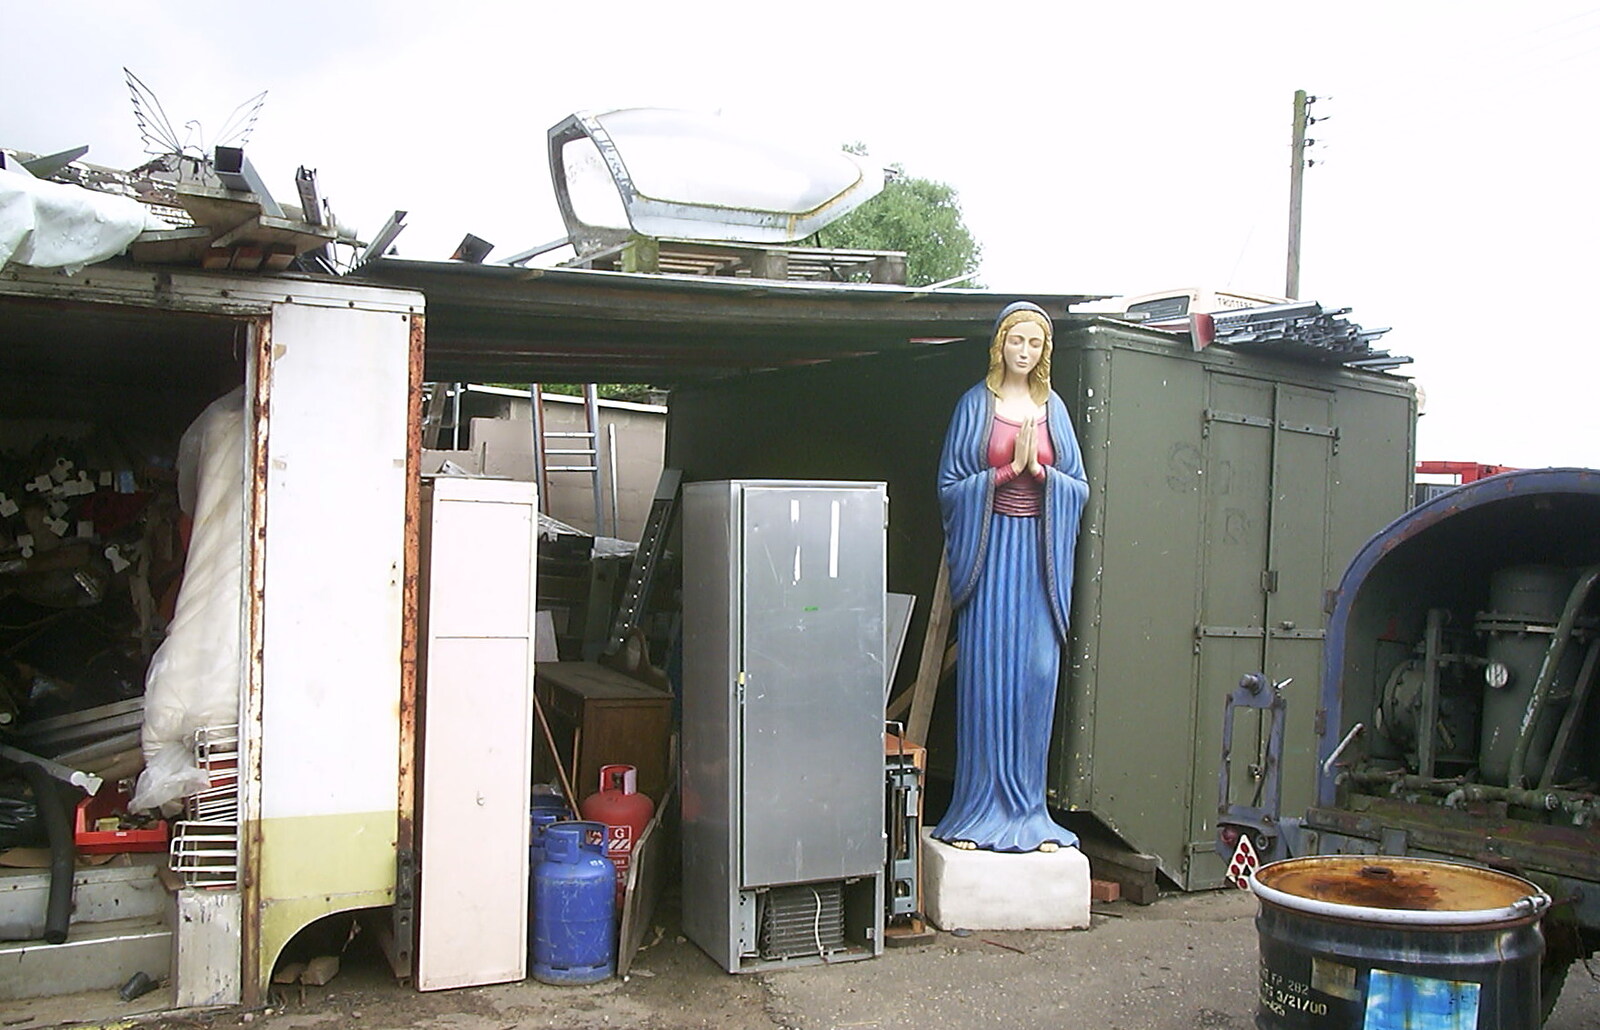 Aircraft canopy and a praying Mary at Gillings from A Hard-Drive Clock and Other Projects, Brome, Suffolk - 28th June 2002